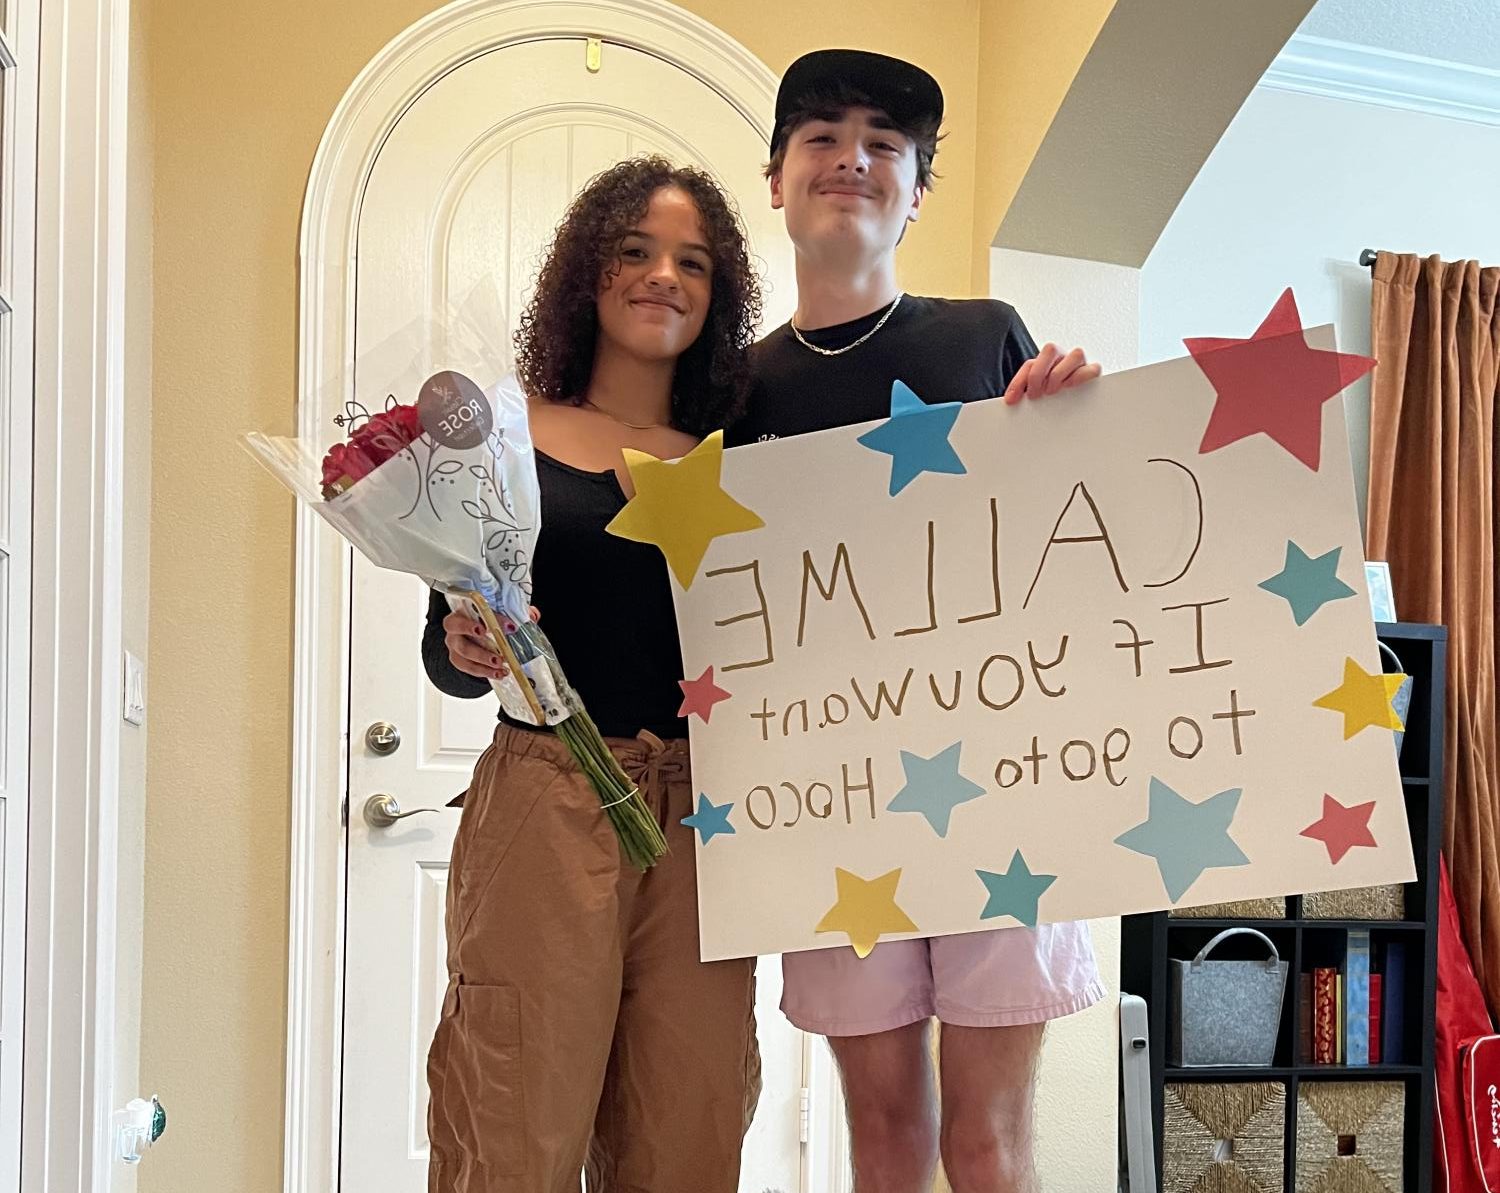 Sarah Jones and Anthony (Tony) Mitchell after Sarah agreed to go to homecoming with Tony. 